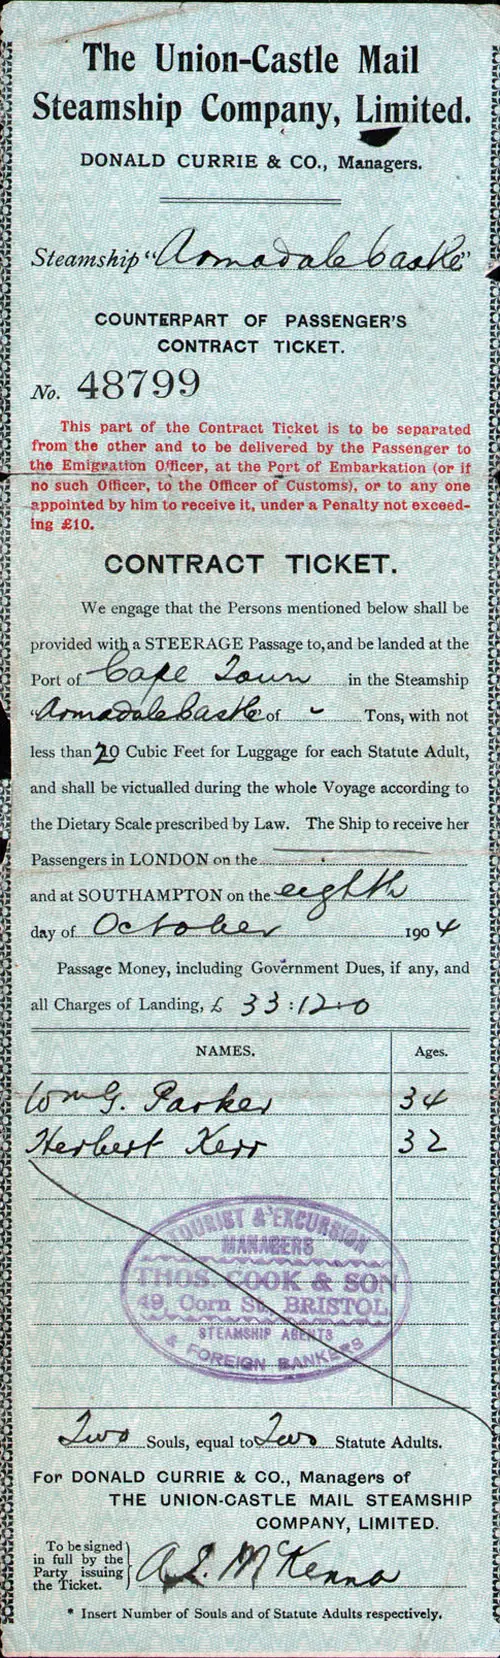 Counterpart of Passenger Contract Ticket for Passage from Cape Town, South Africa to Southampton, 1904.